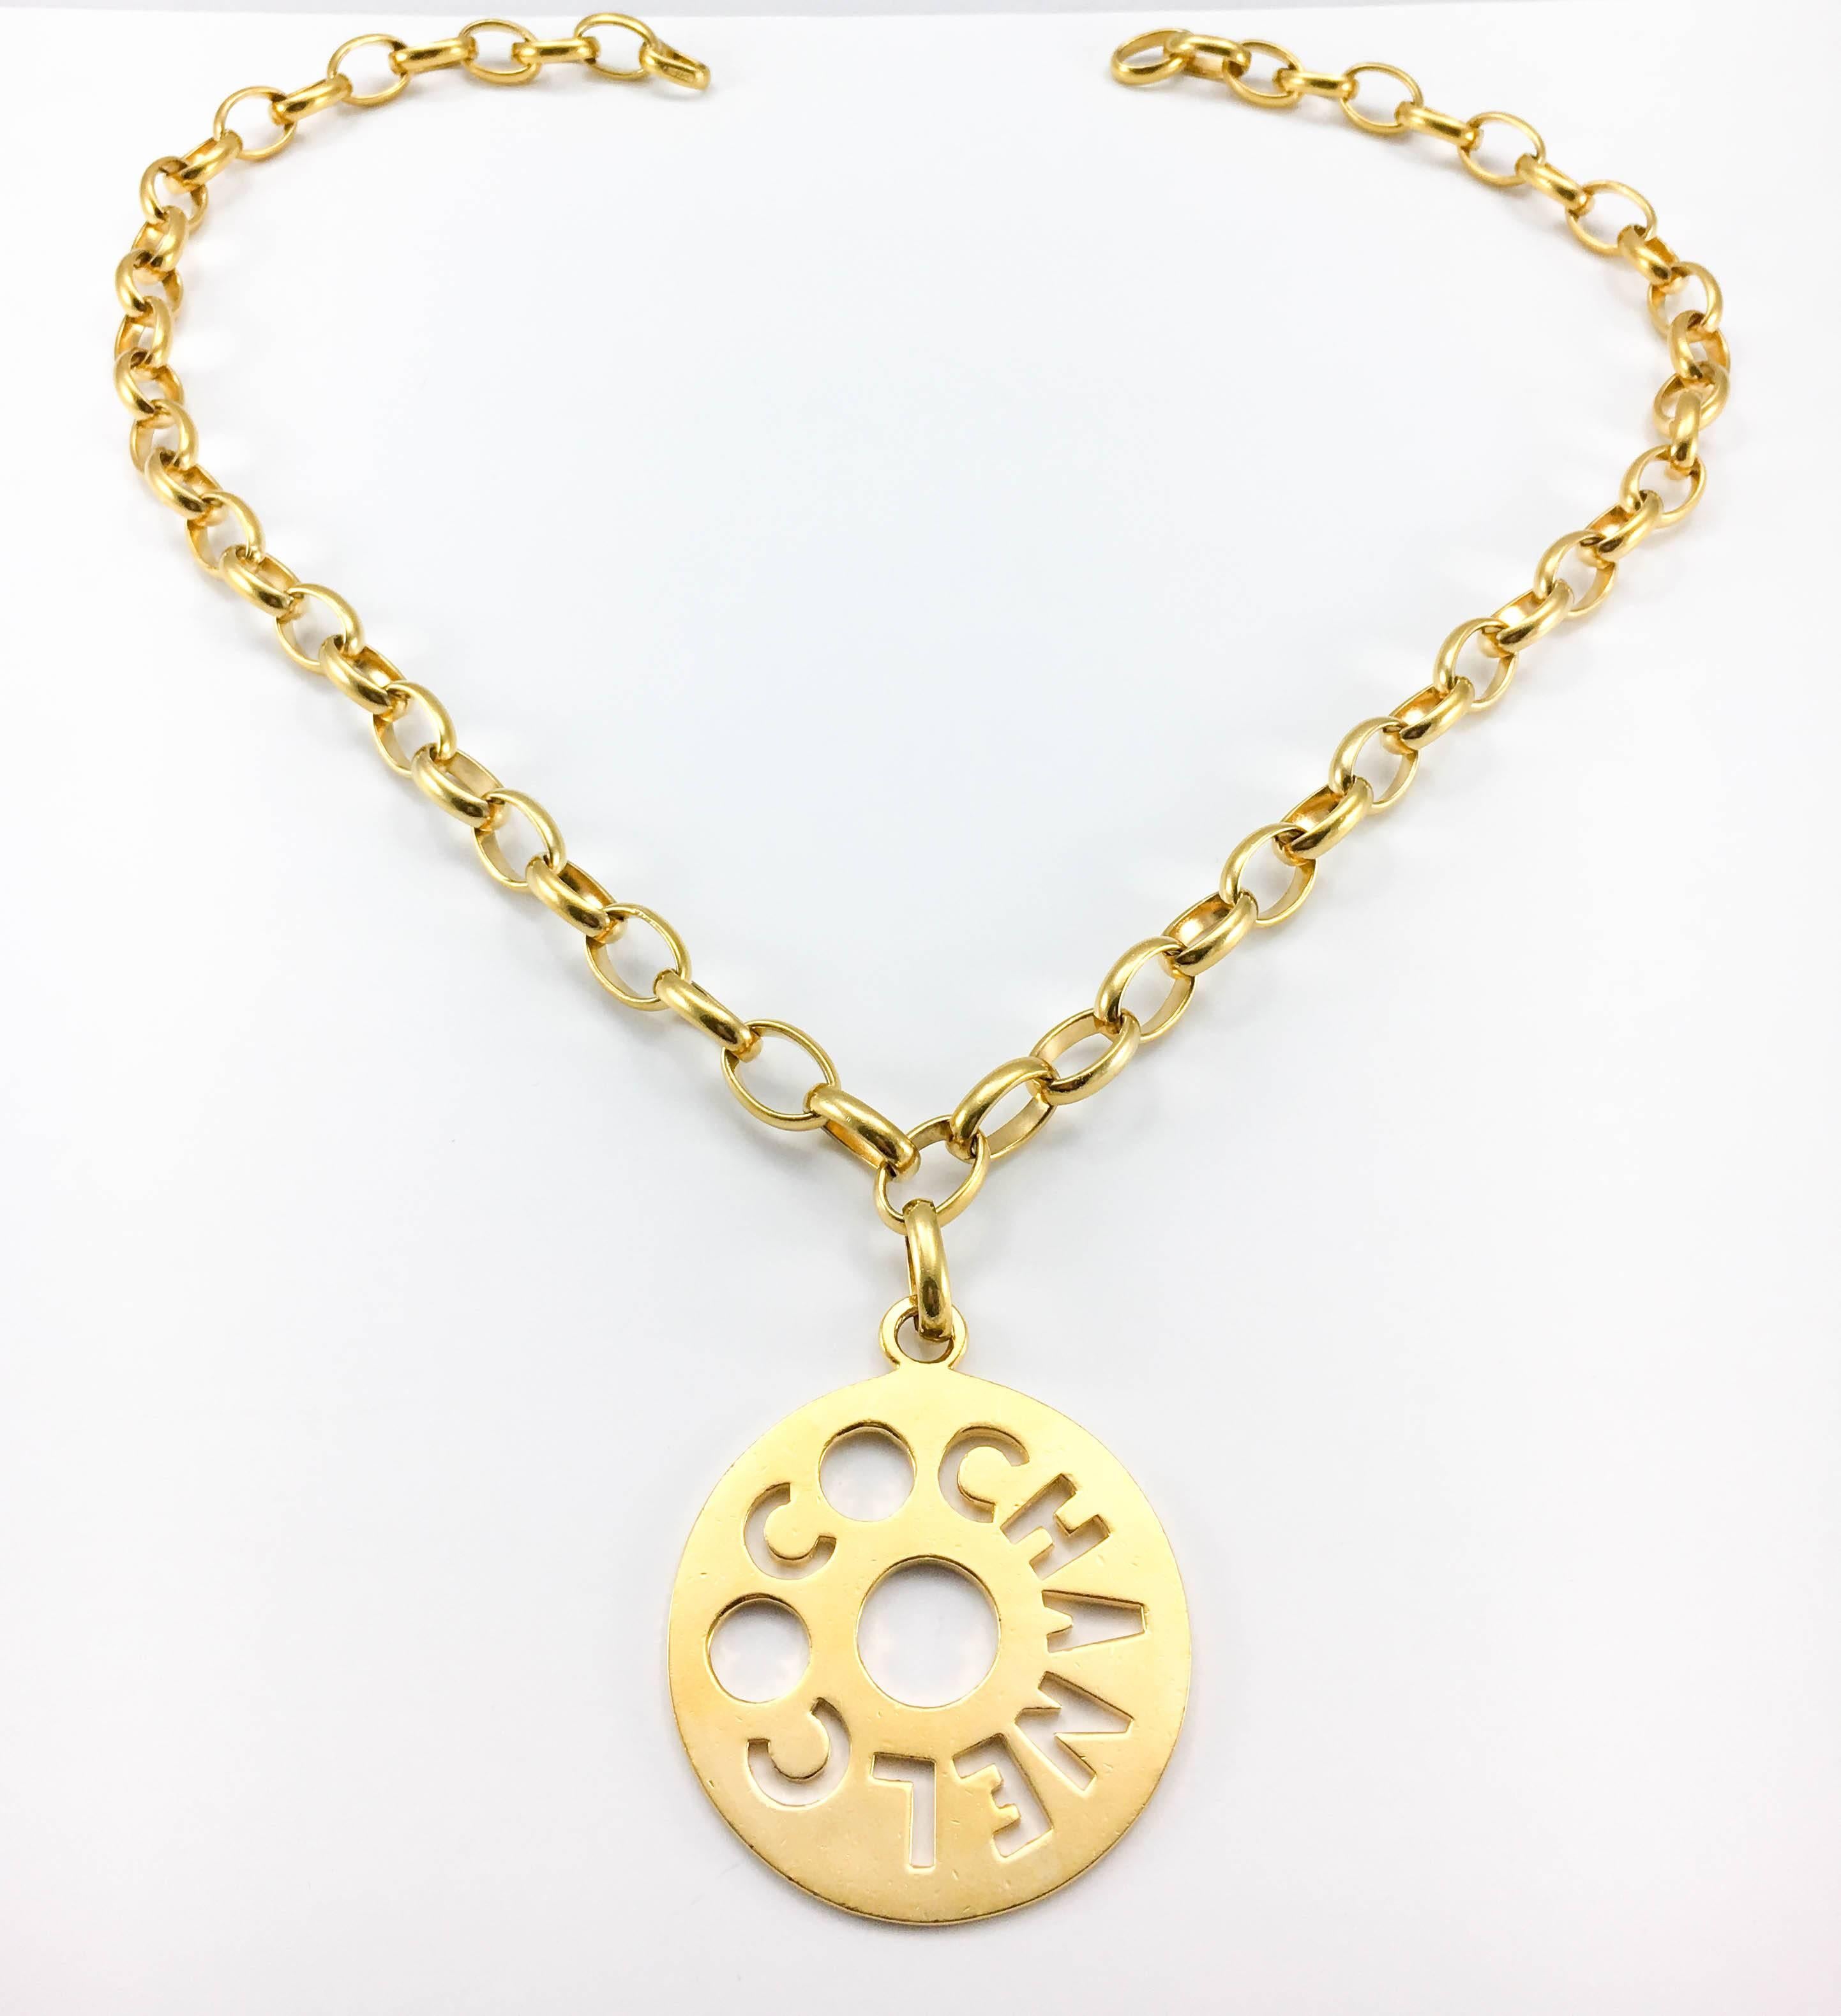 Chanel Chunky Gold-Tone 'Coco Chanel' Disk Pendant Chain Necklace - 1970's 1